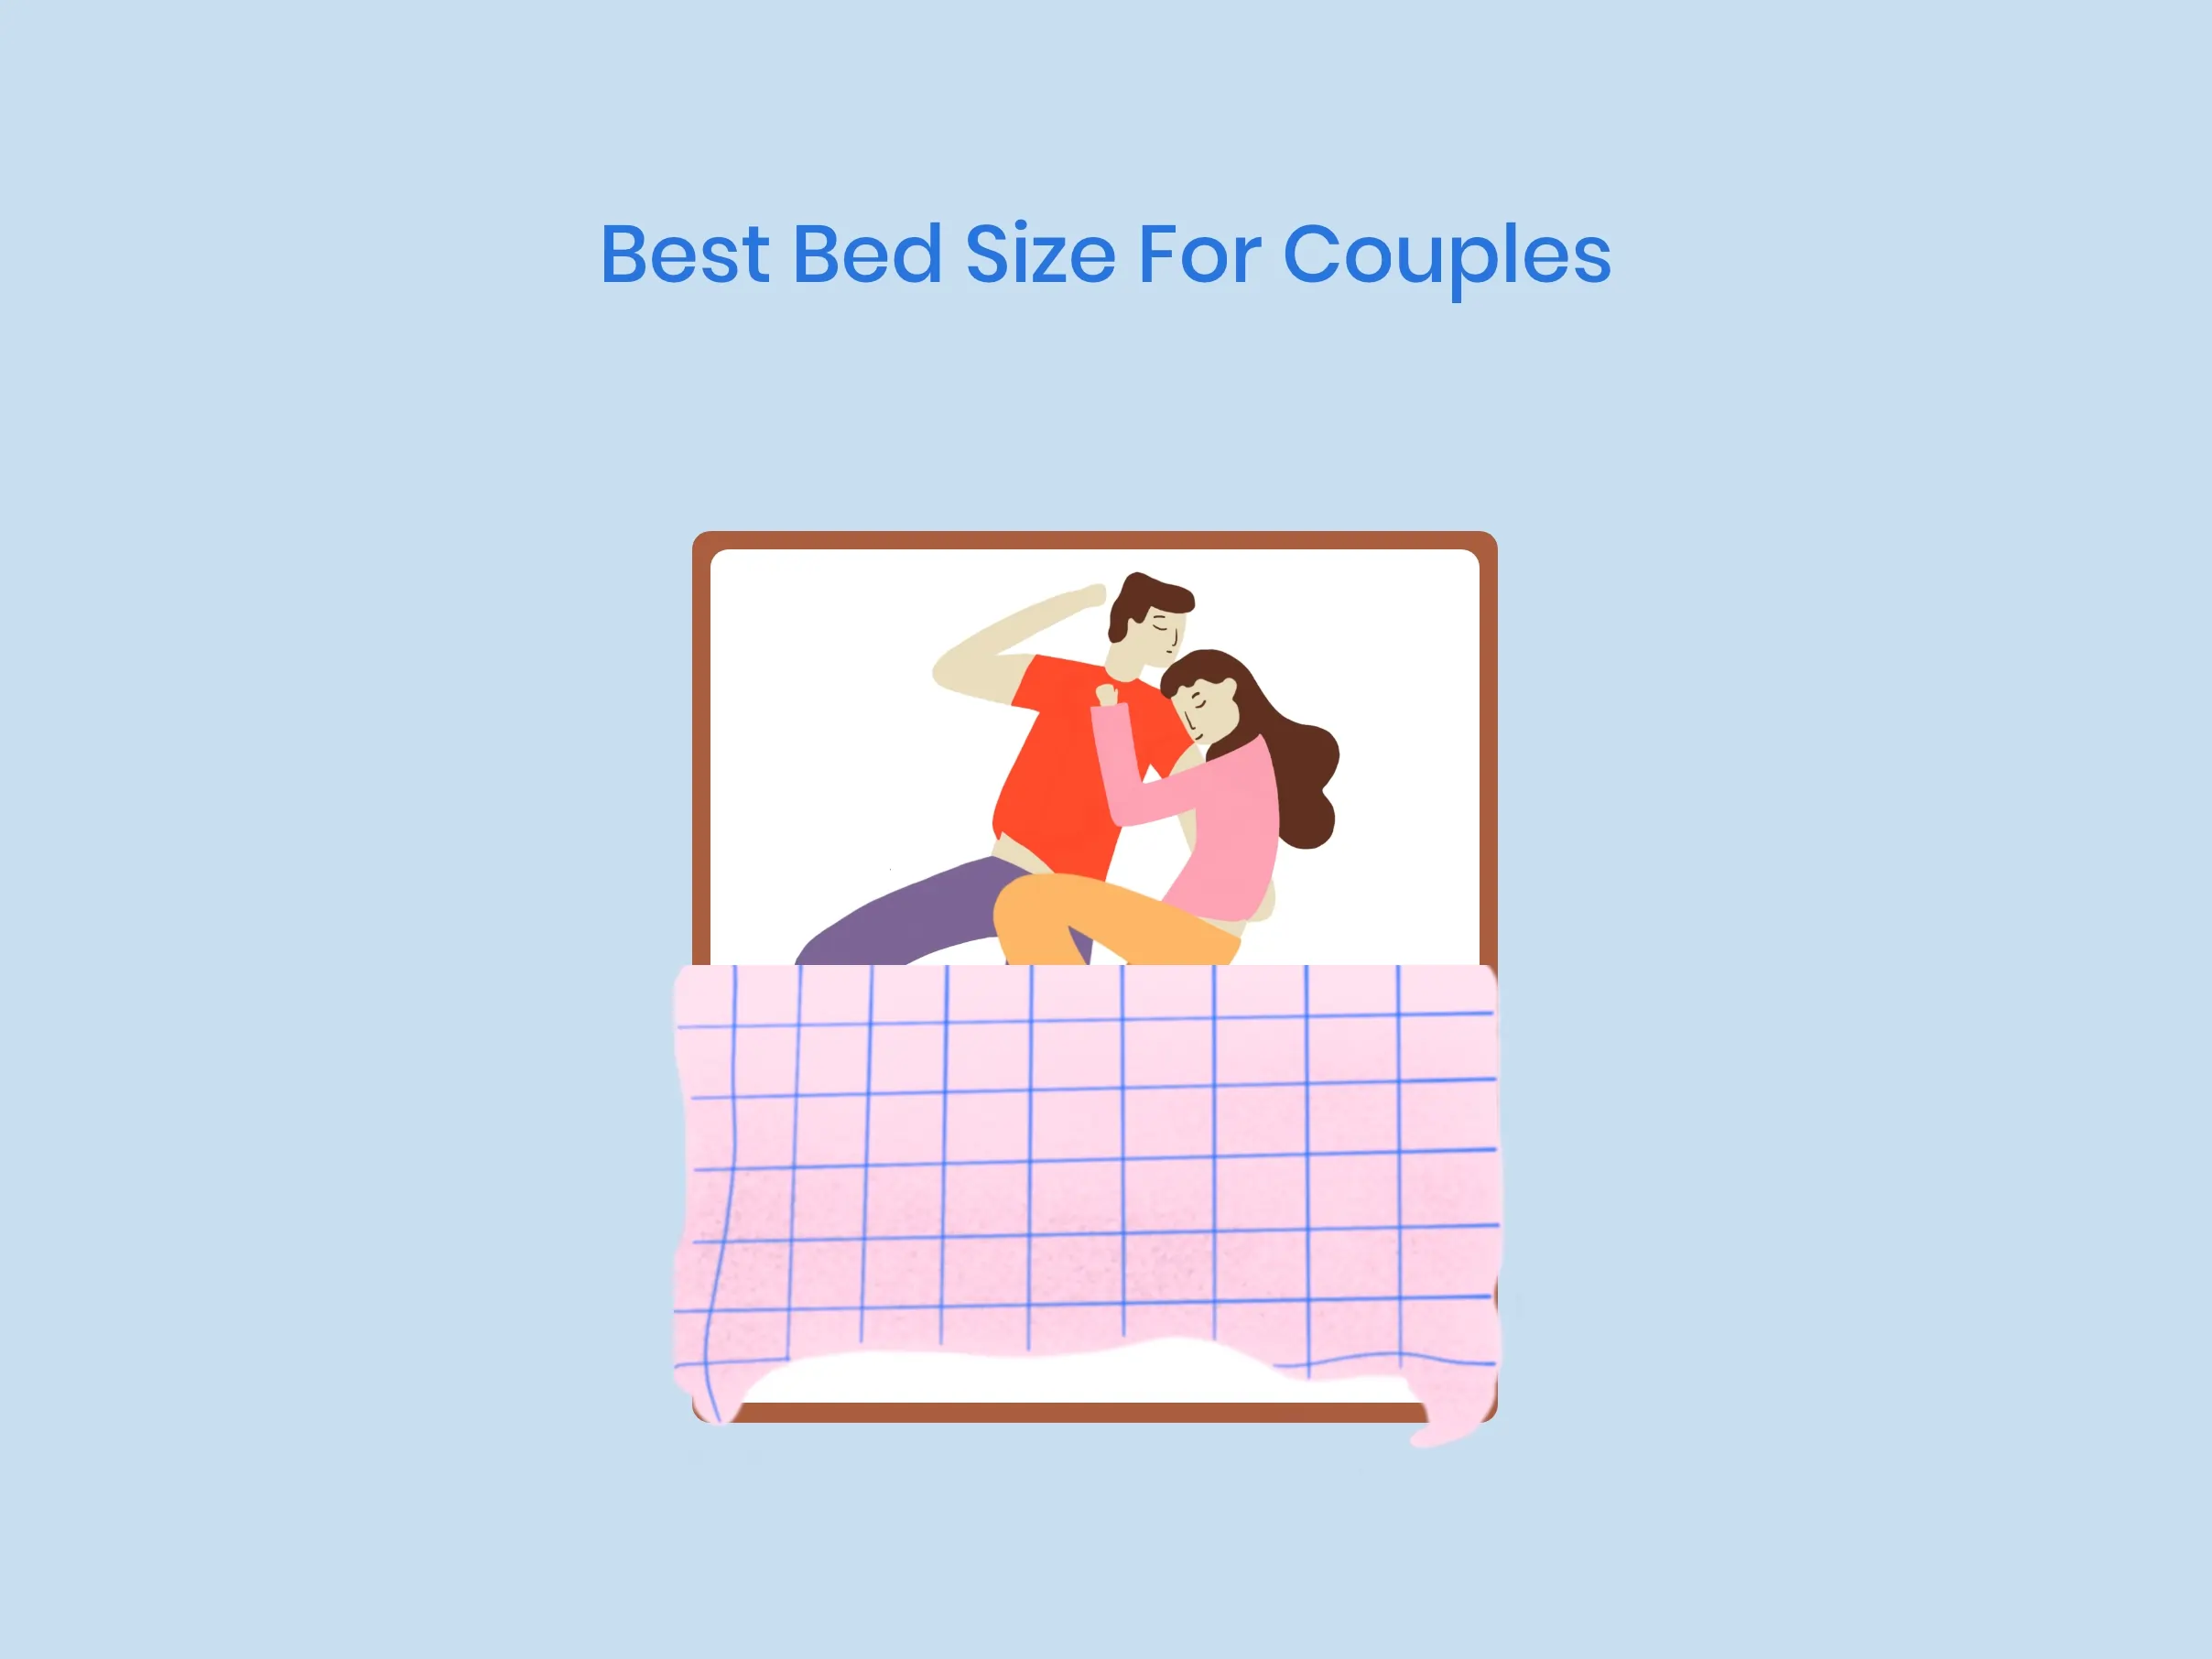 Which Is The Best Bed Size For Couples?